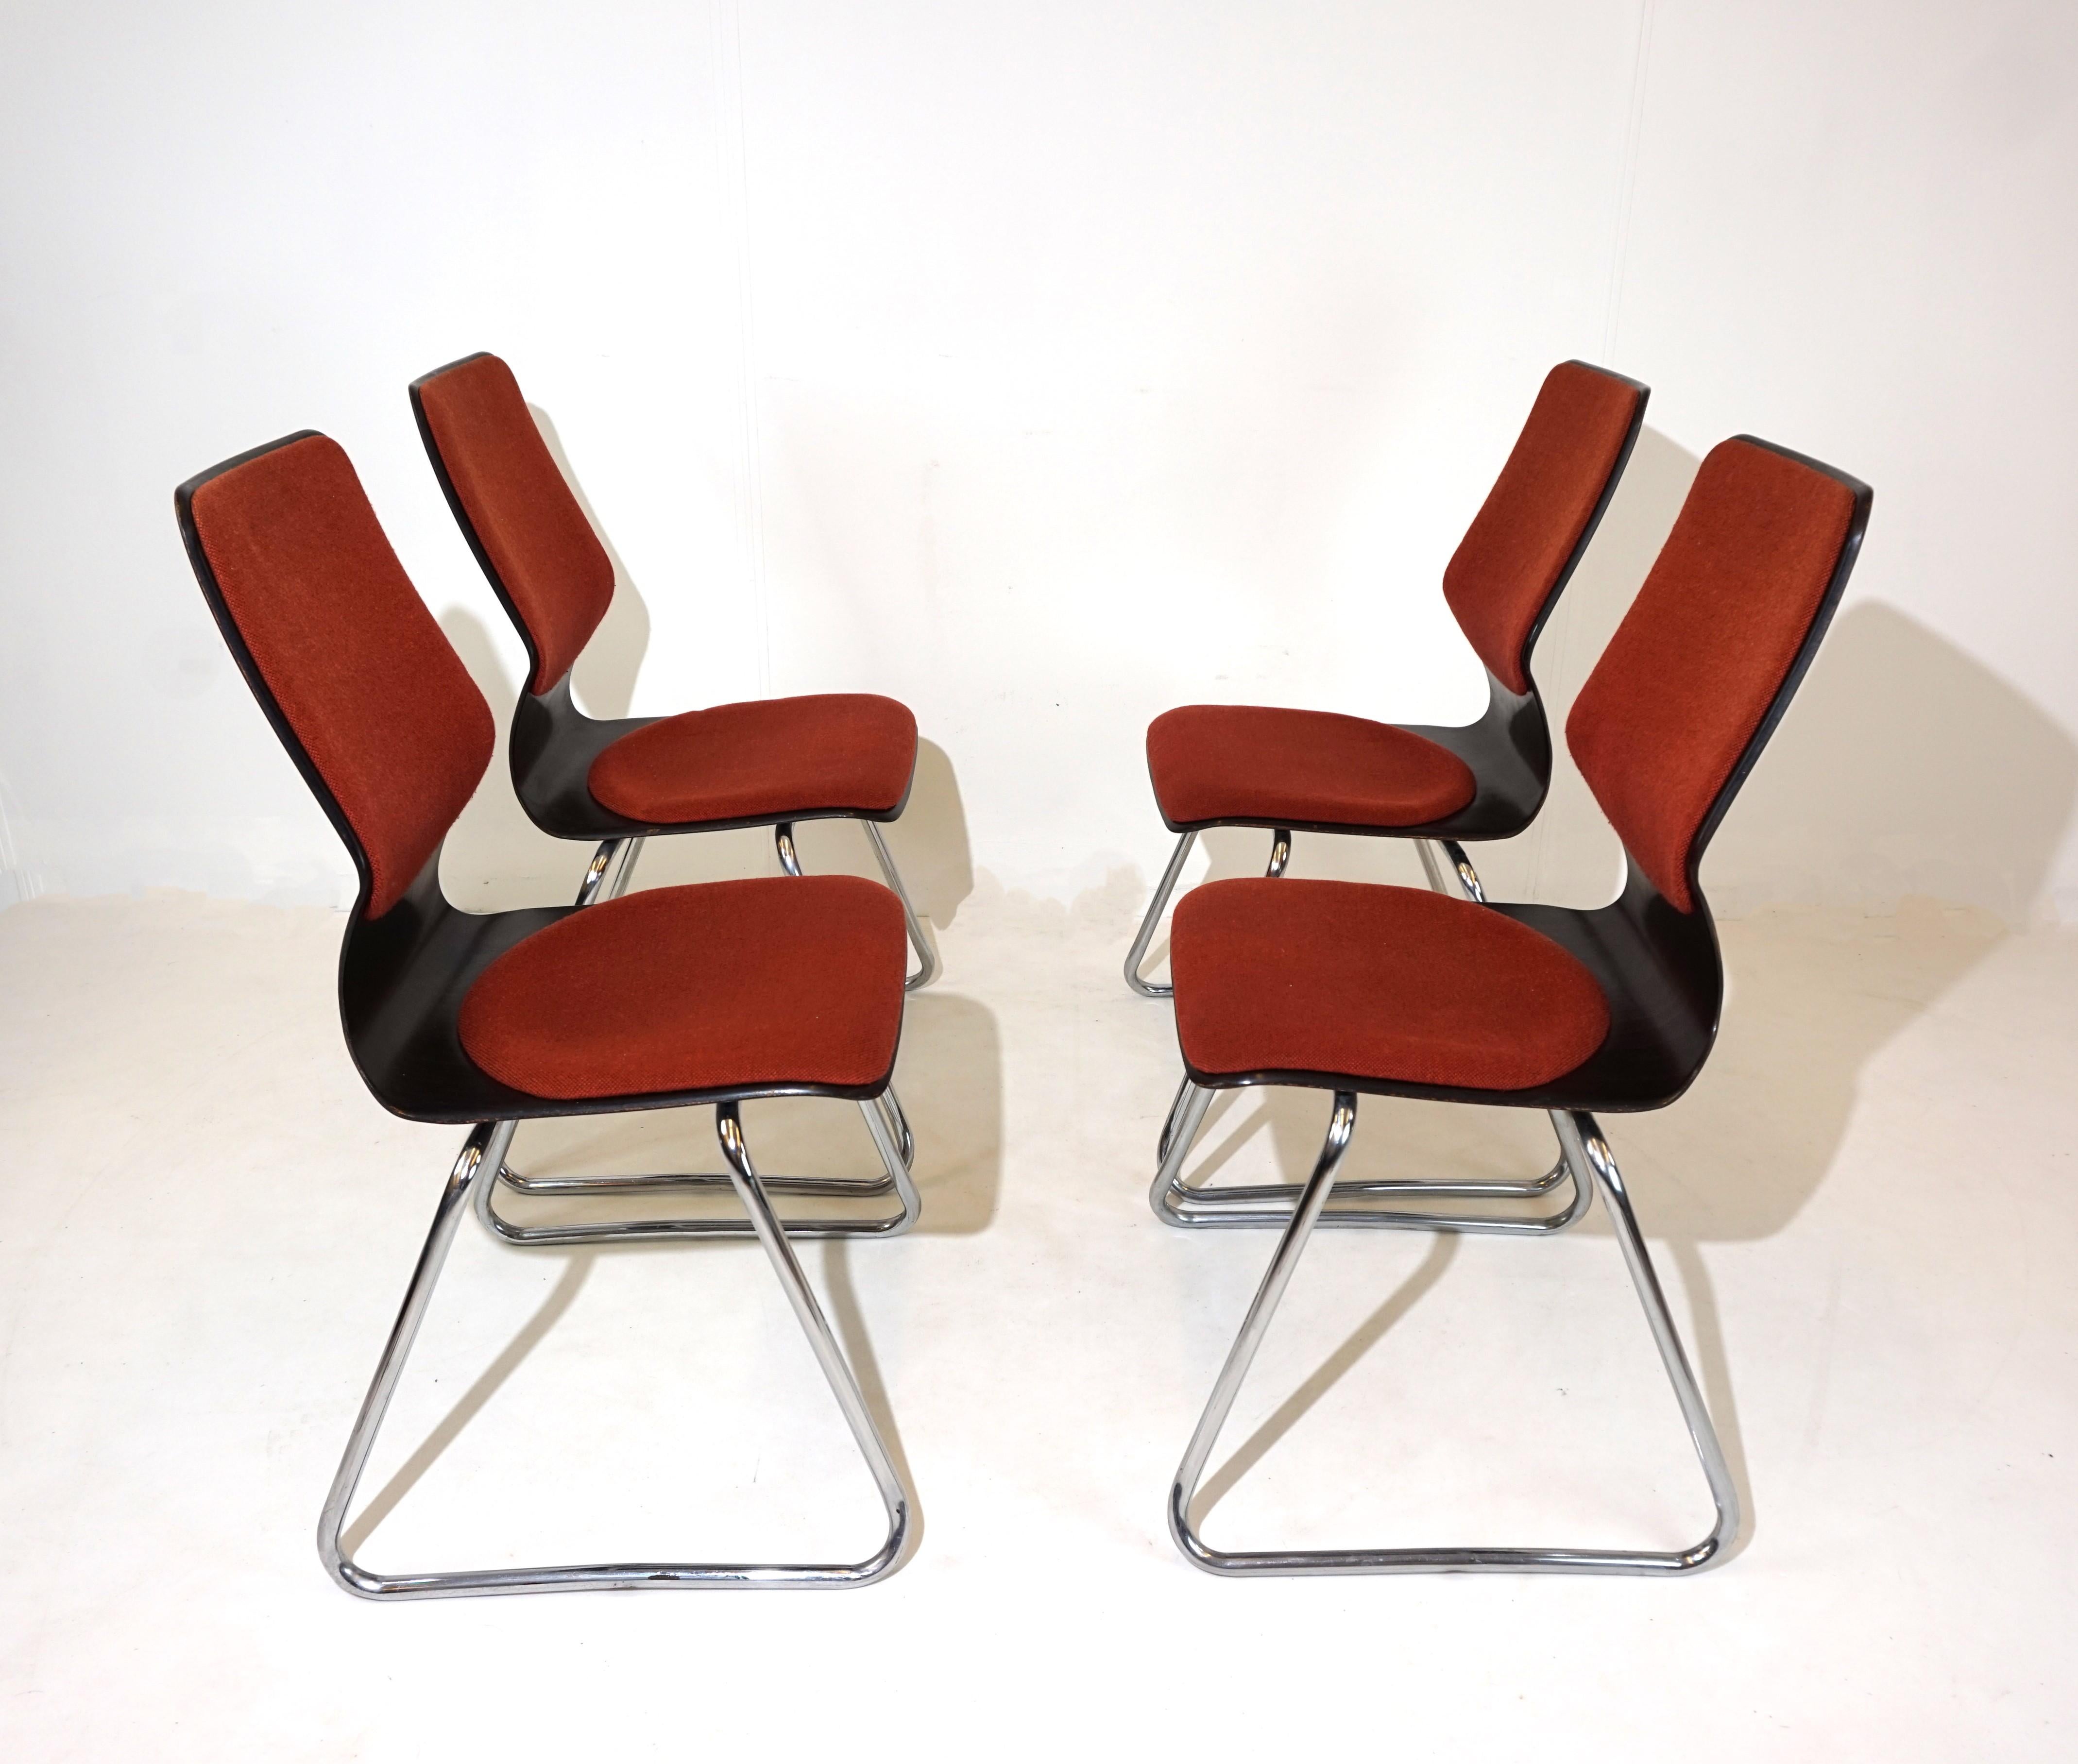 Flötotto set of 4 Pagholz chairs by Elmar Flötotto For Sale 1